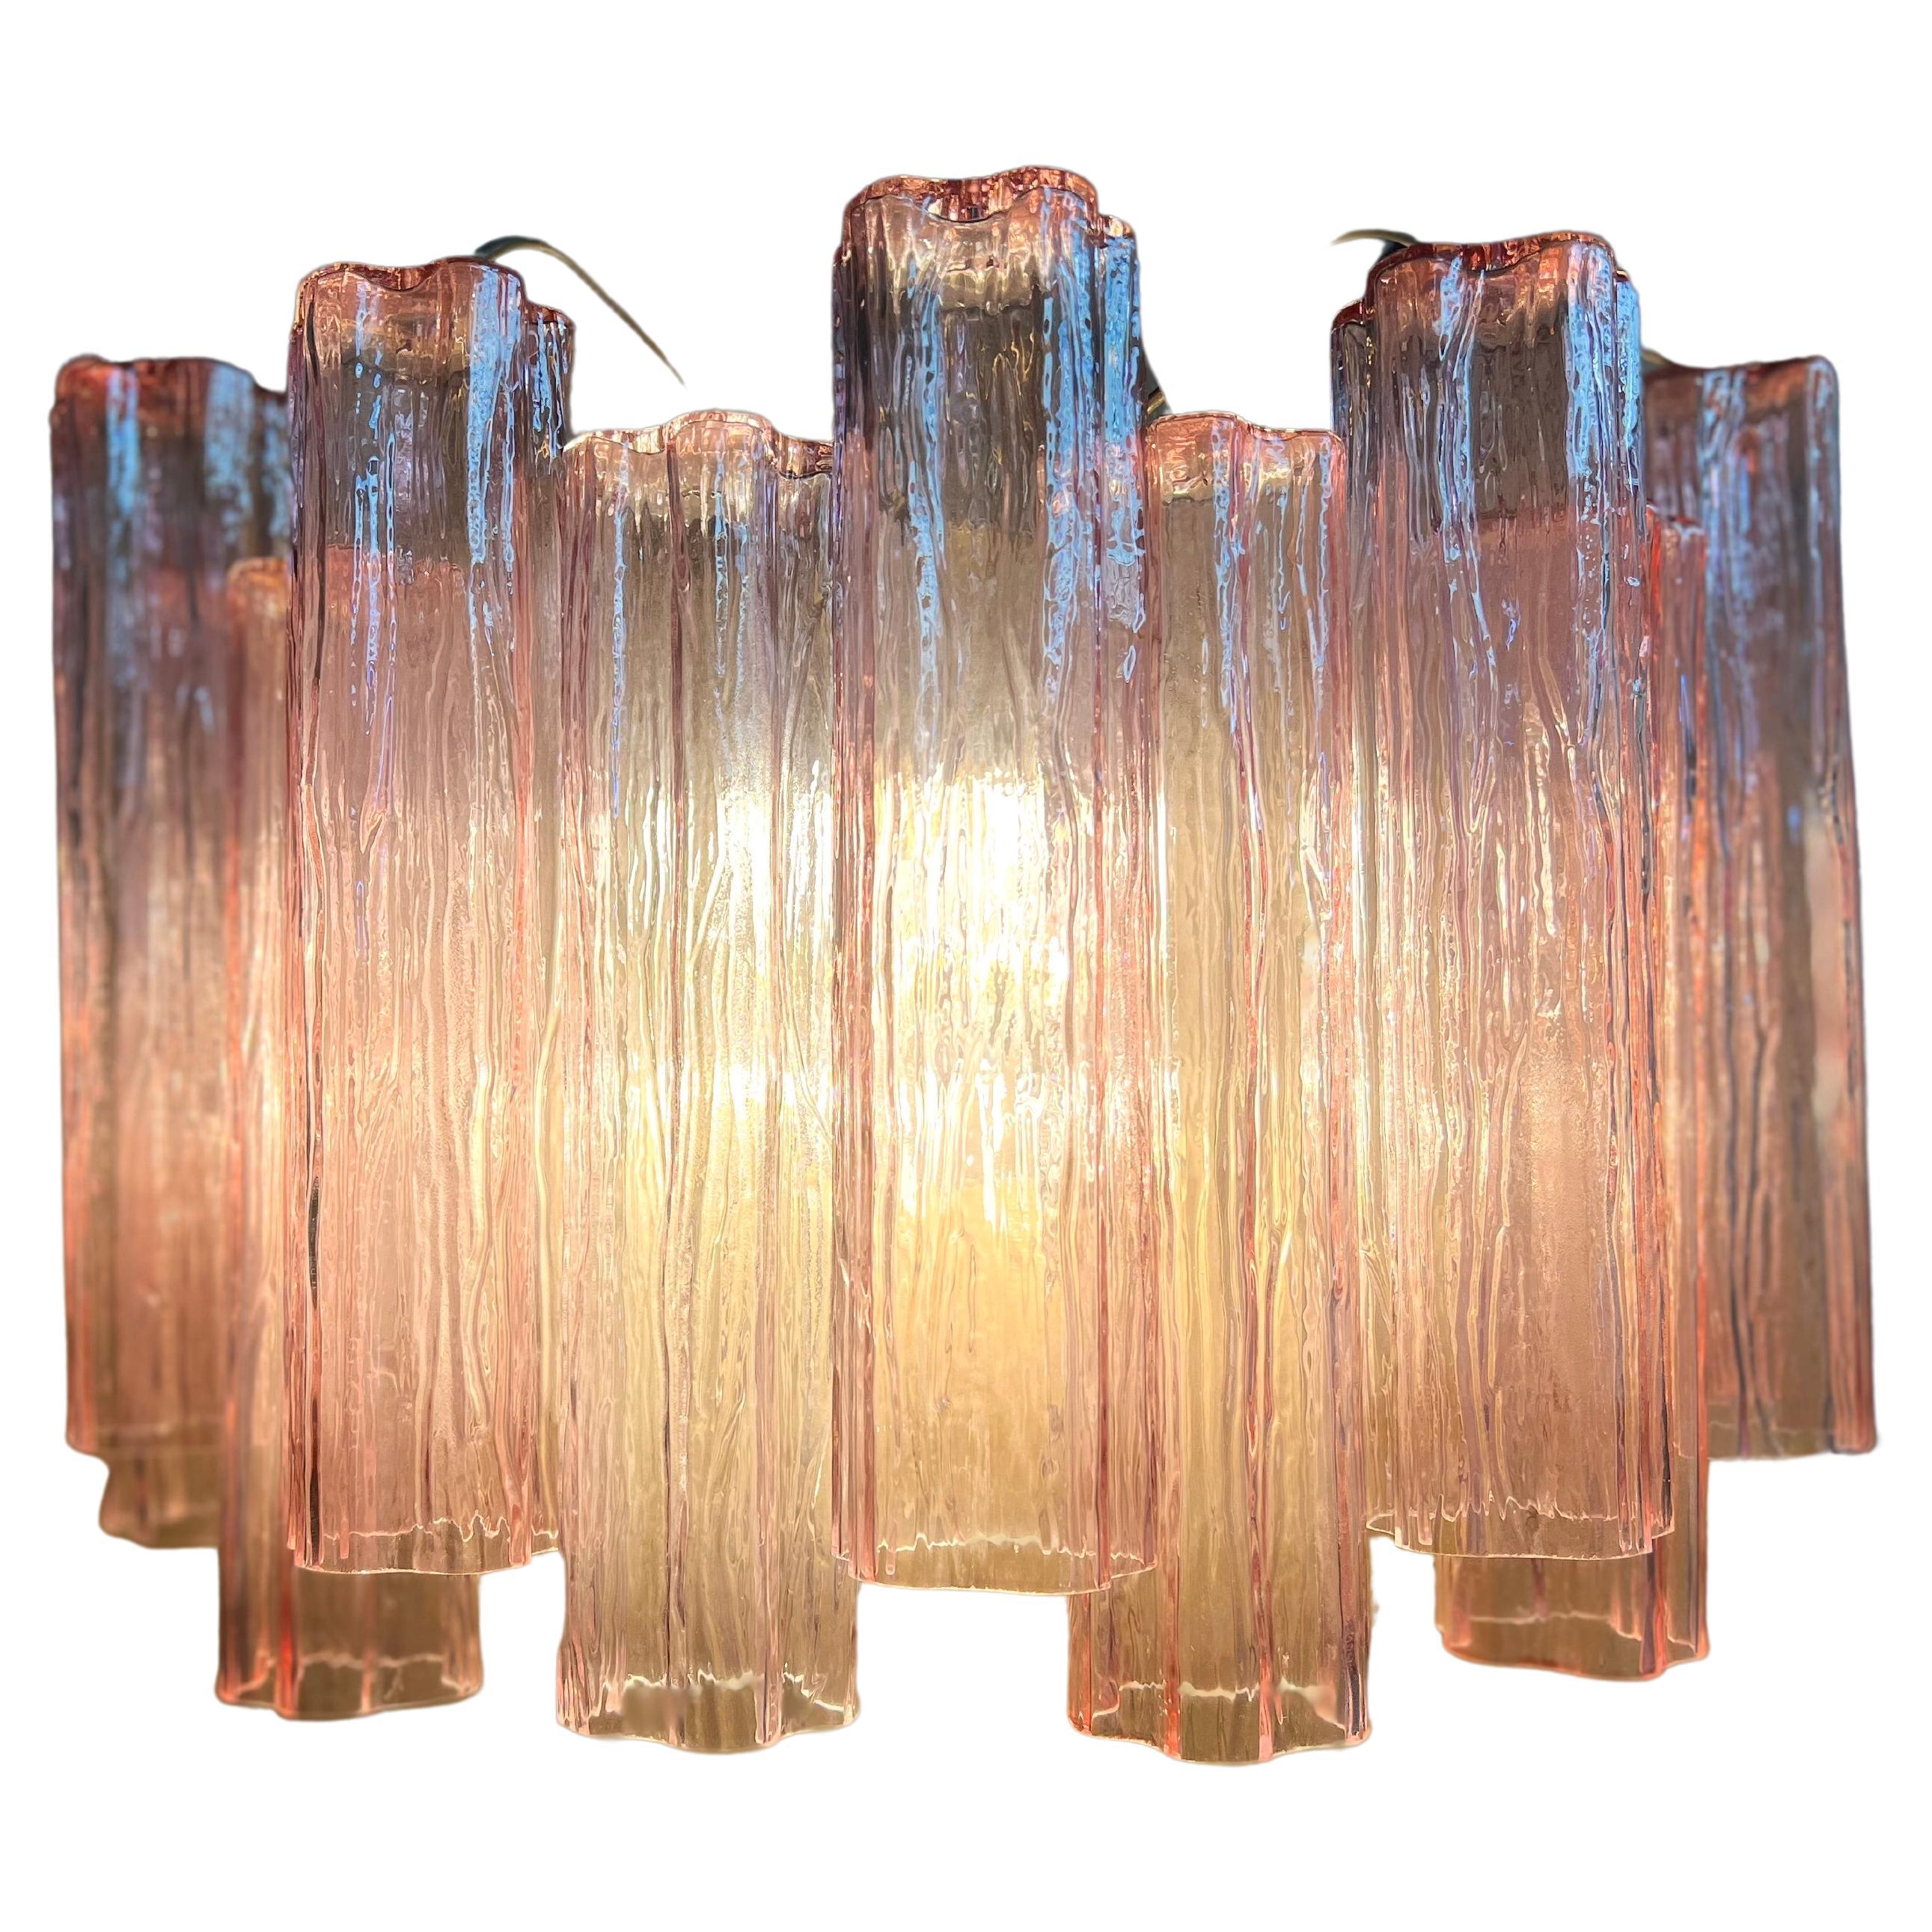 A very fine pair of sconces in the style Toni Zuccheri for Venini, 12 hand blown glass tubes on each sconce, each measuring 11.80” long.